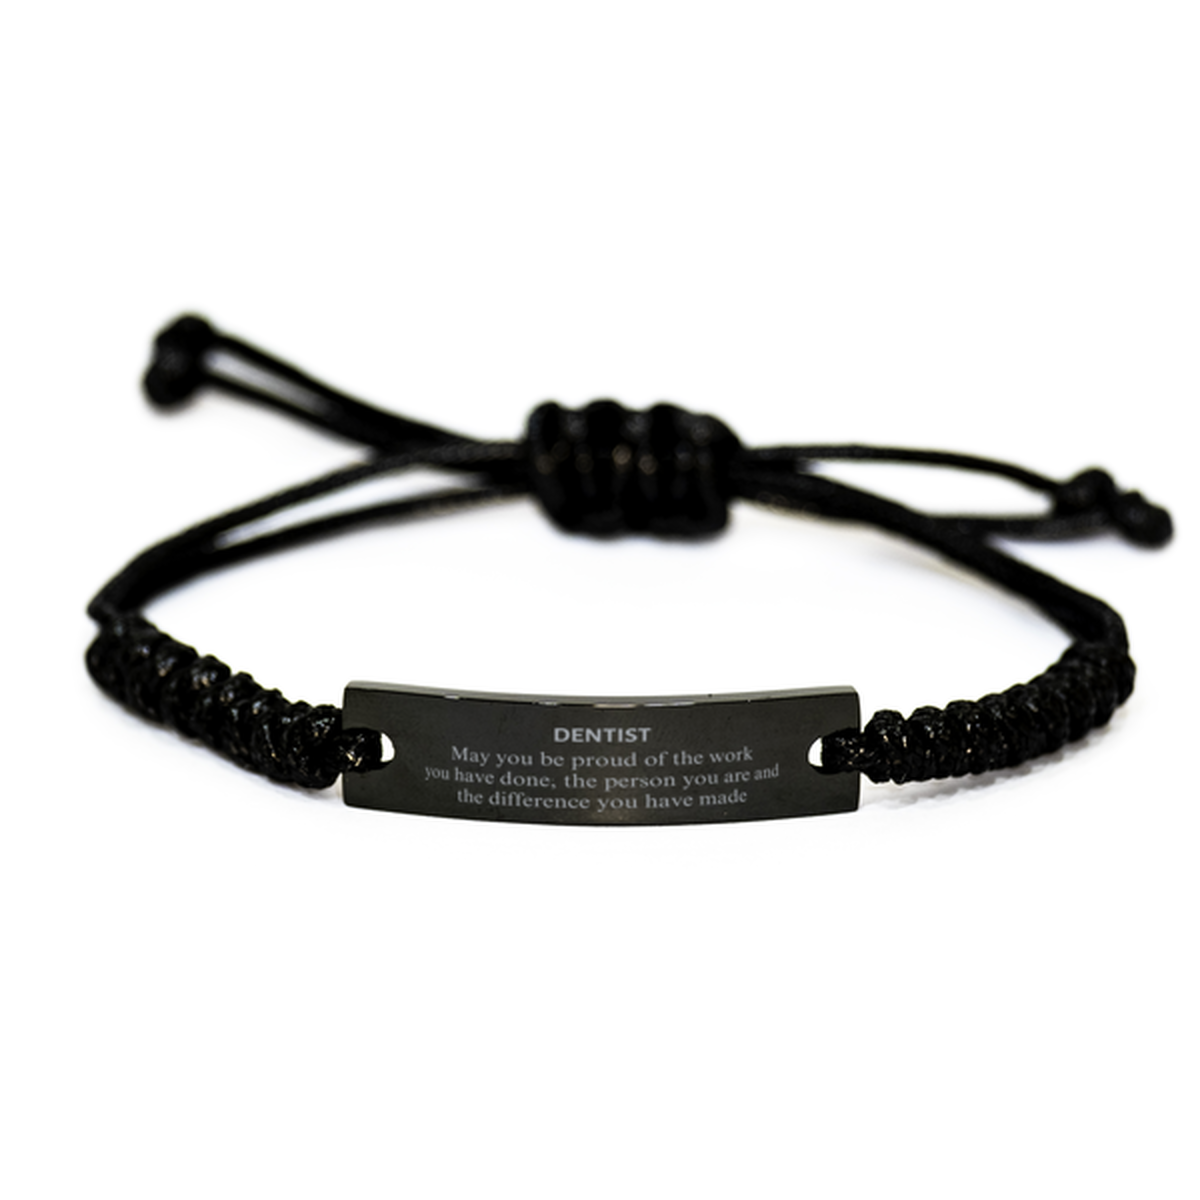 Dentist May you be proud of the work you have done, Retirement Dentist Black Rope Bracelet for Colleague Appreciation Gifts Amazing for Dentist